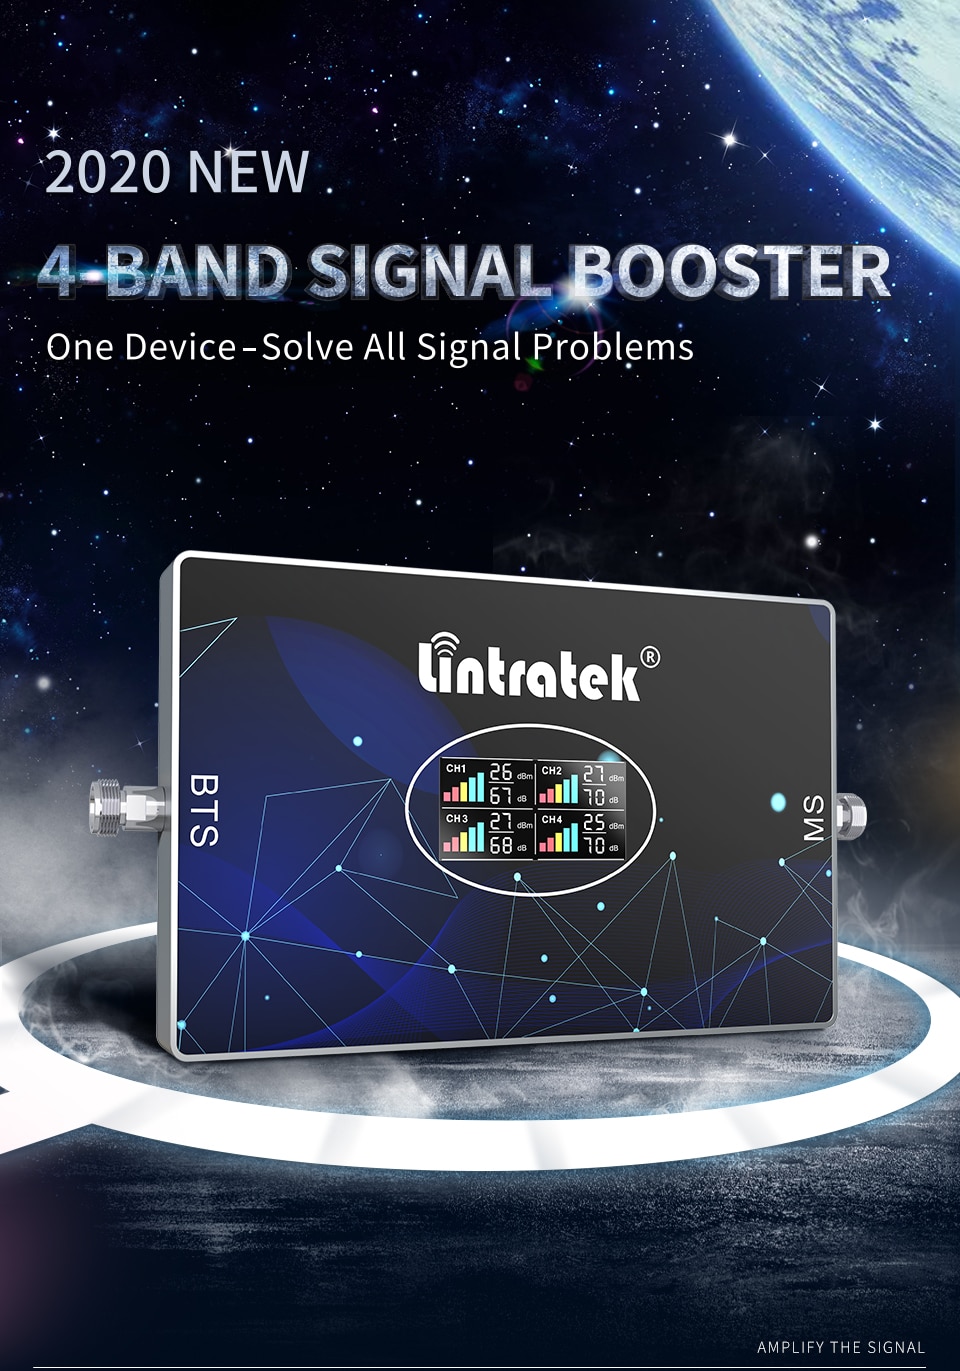 Lintratek 70dB repetidor 4G 3G 2G GSM four band signal booster B3 B1 B7 B20 900 1800 2100 2600 LTE800 mhz mobile phone amplifier